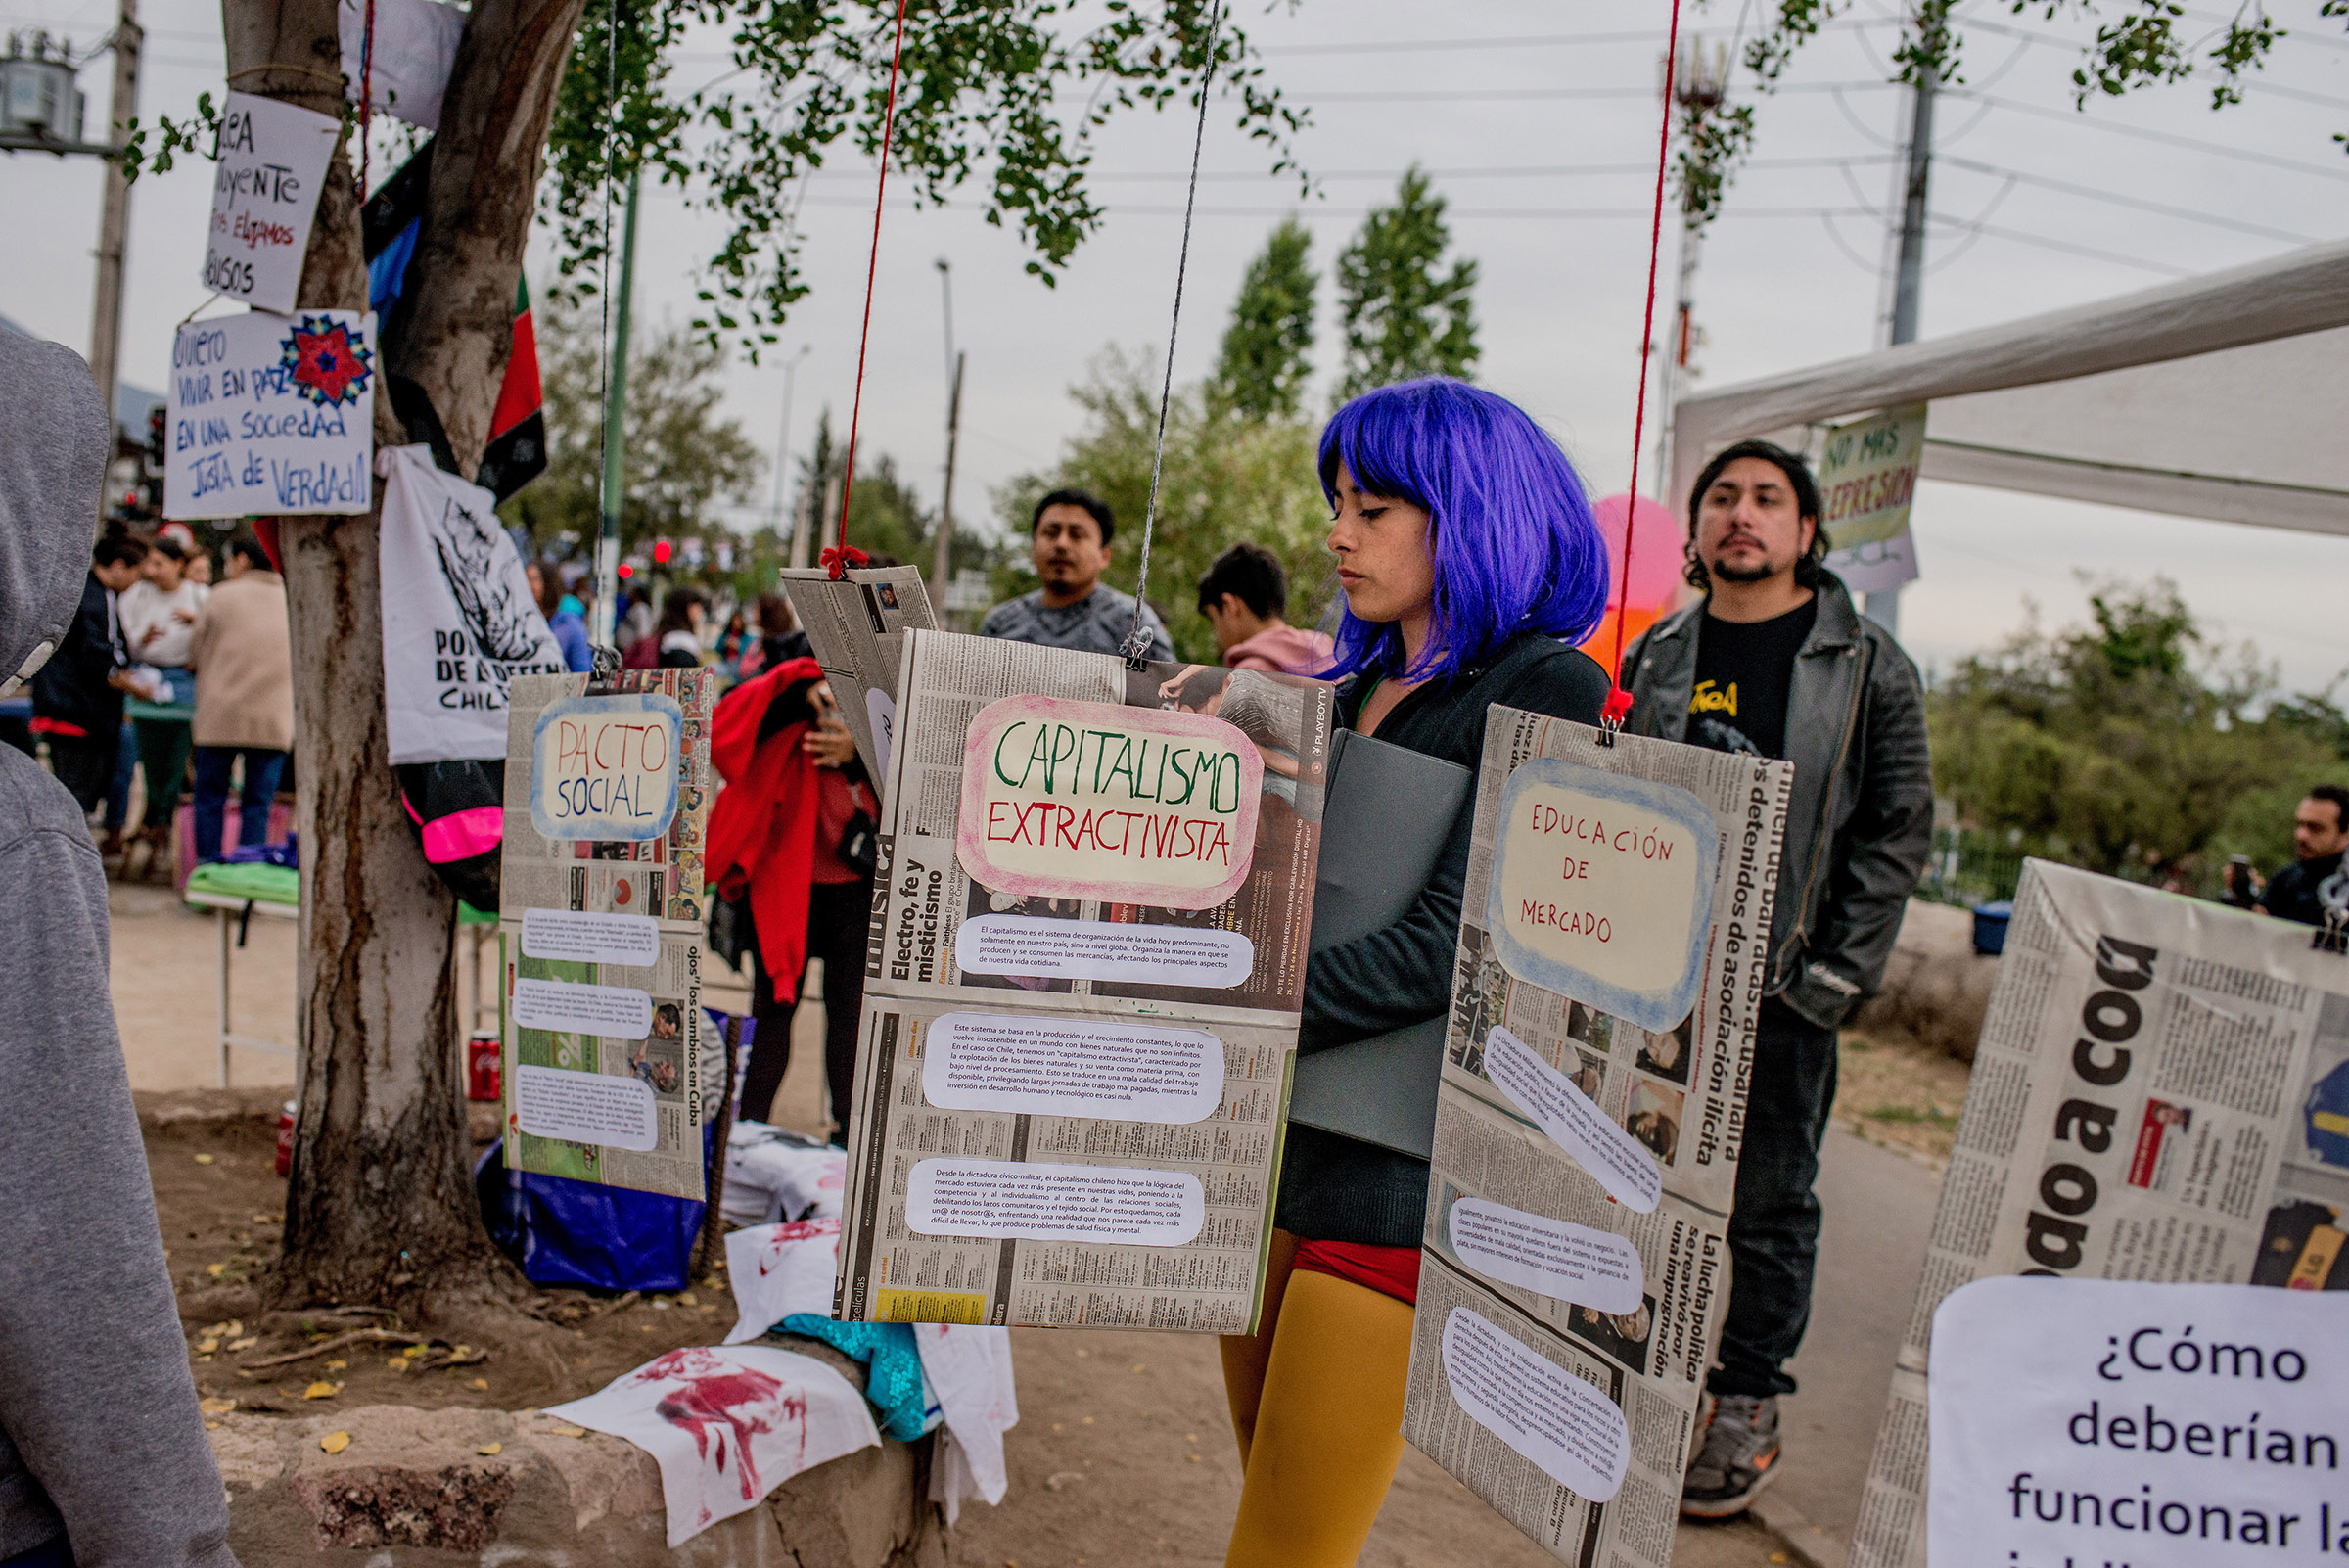 A gathering in PeÒalolÈn, a commune outside Santiago, focuses on issues like education, economy and the Constitution, in Chile, Oct. 27, 2019. (Tomas Munita/The New York Times)